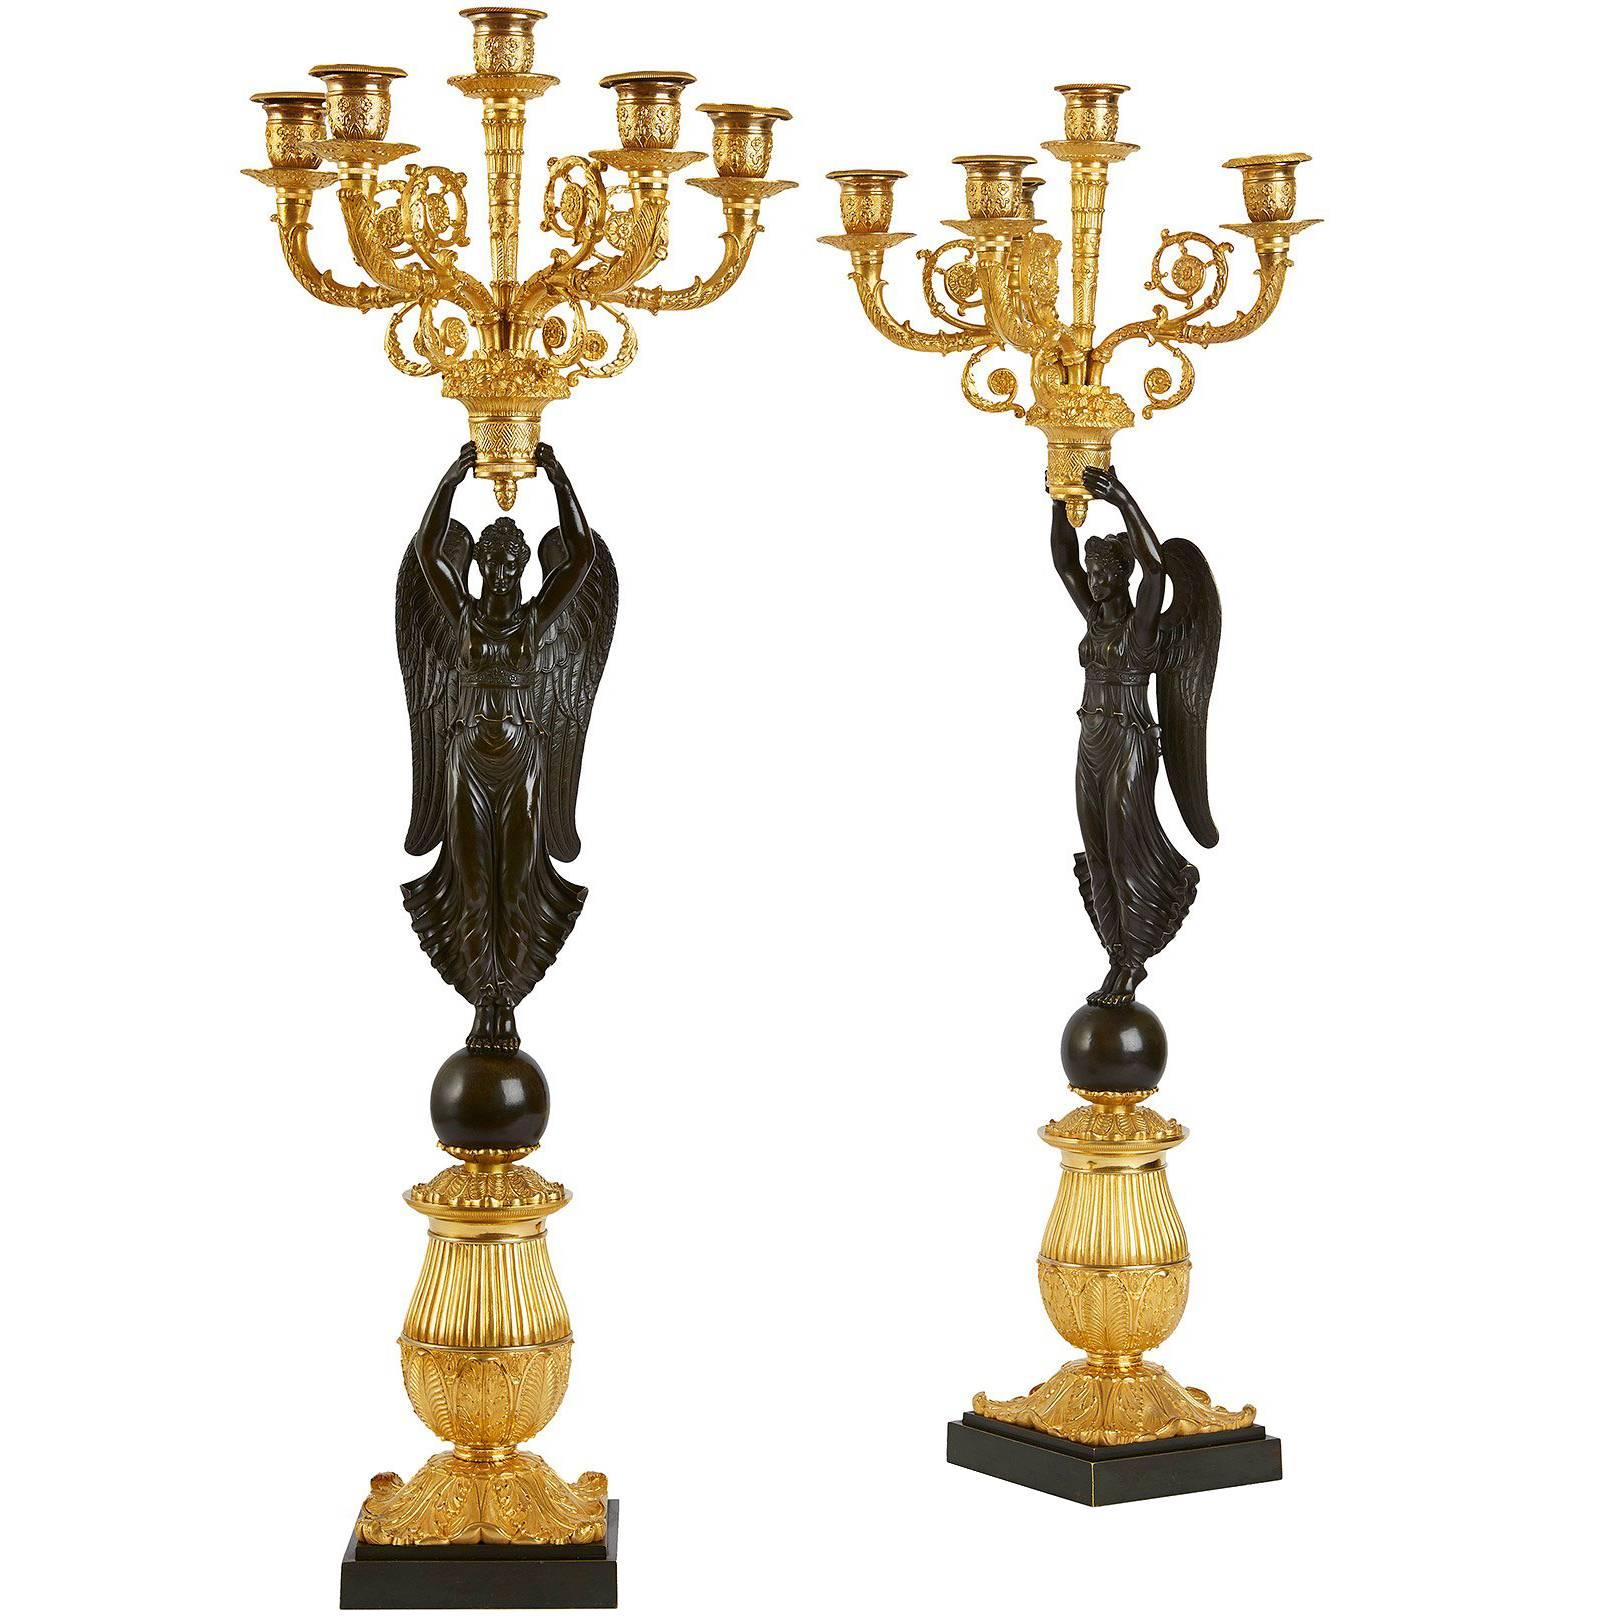 Pair of Empire Period Gilt and Patinated Bronze Candelabra Attributed to Galle